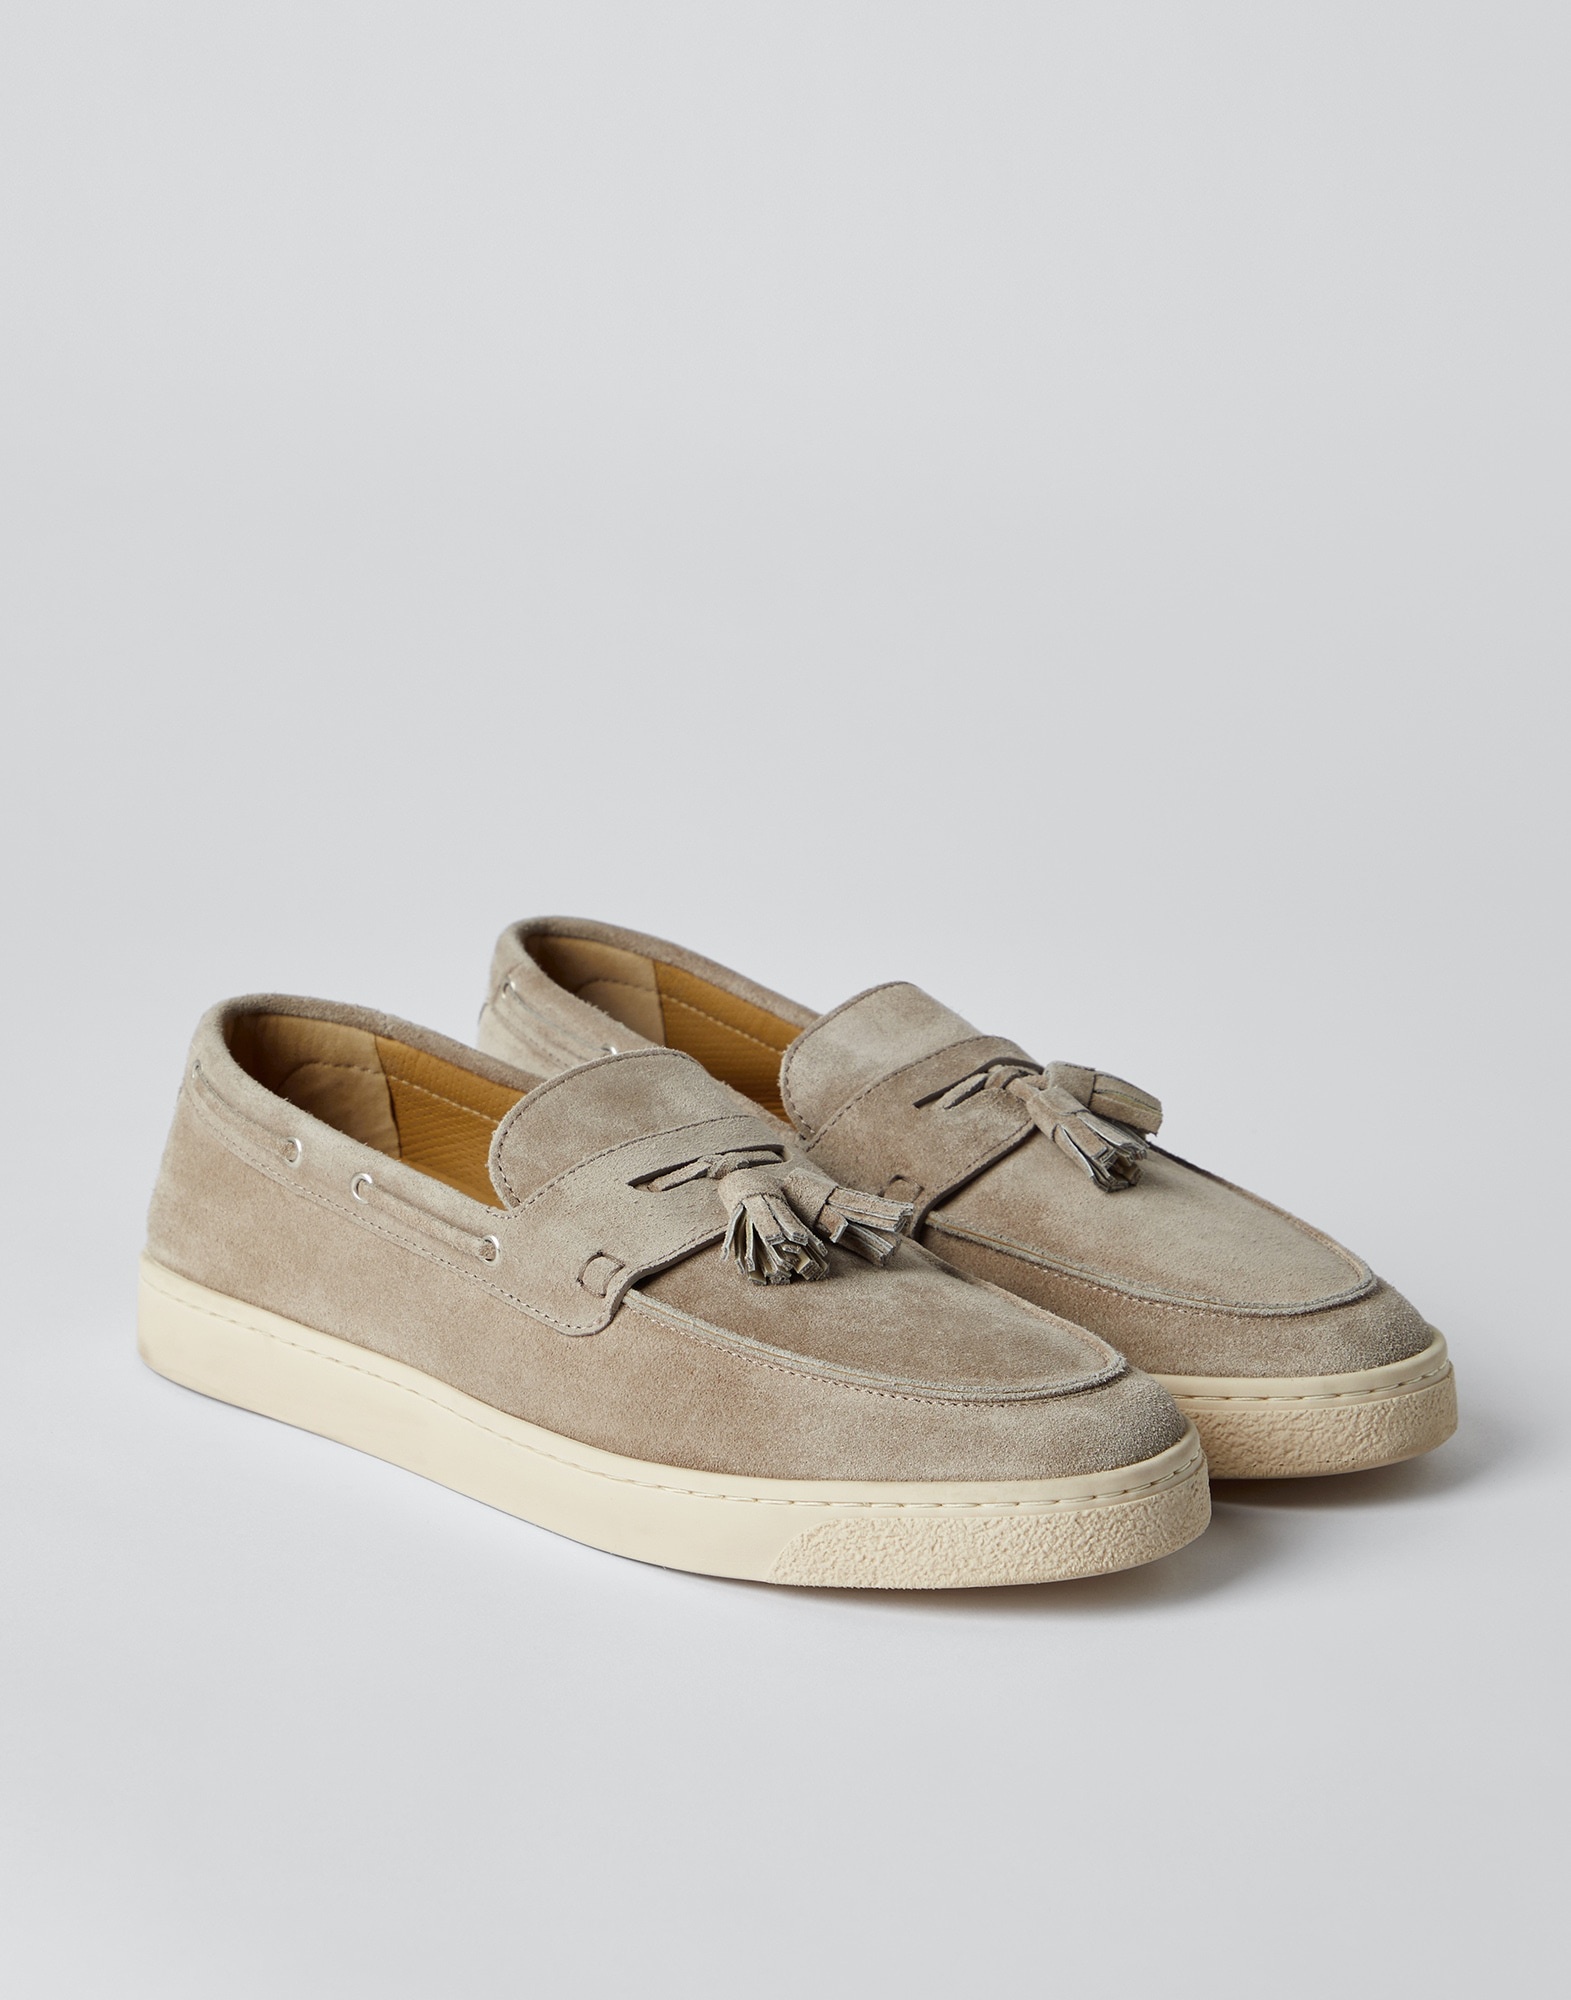 Suede loafer sneakers with tassels and natural rubber sole - 2